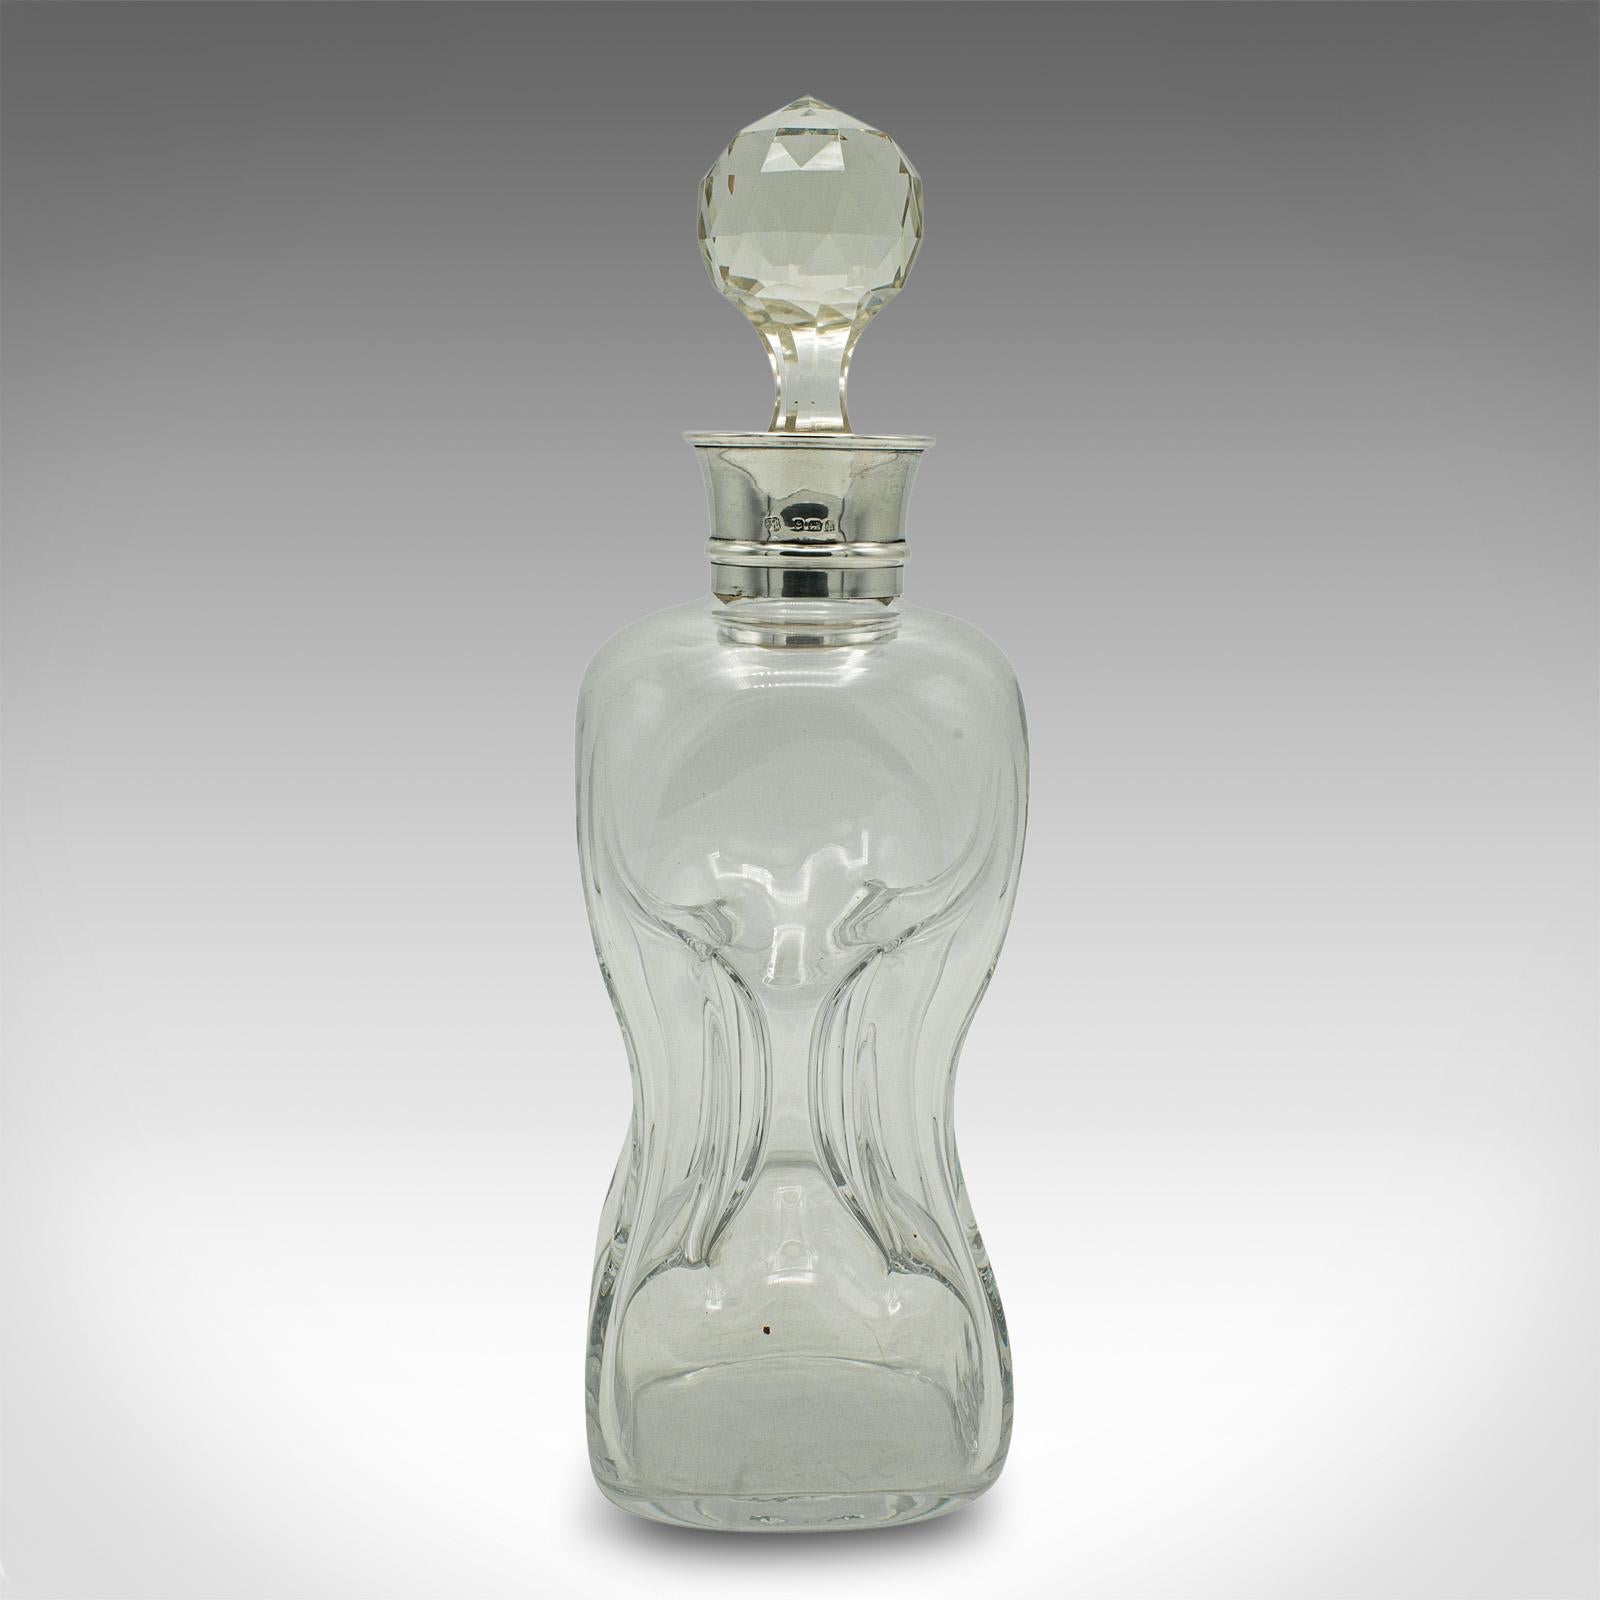 20th Century Antique Port Decanter, English, Glass, Silver, Birmingham, Edwardian, Dated 1907 For Sale